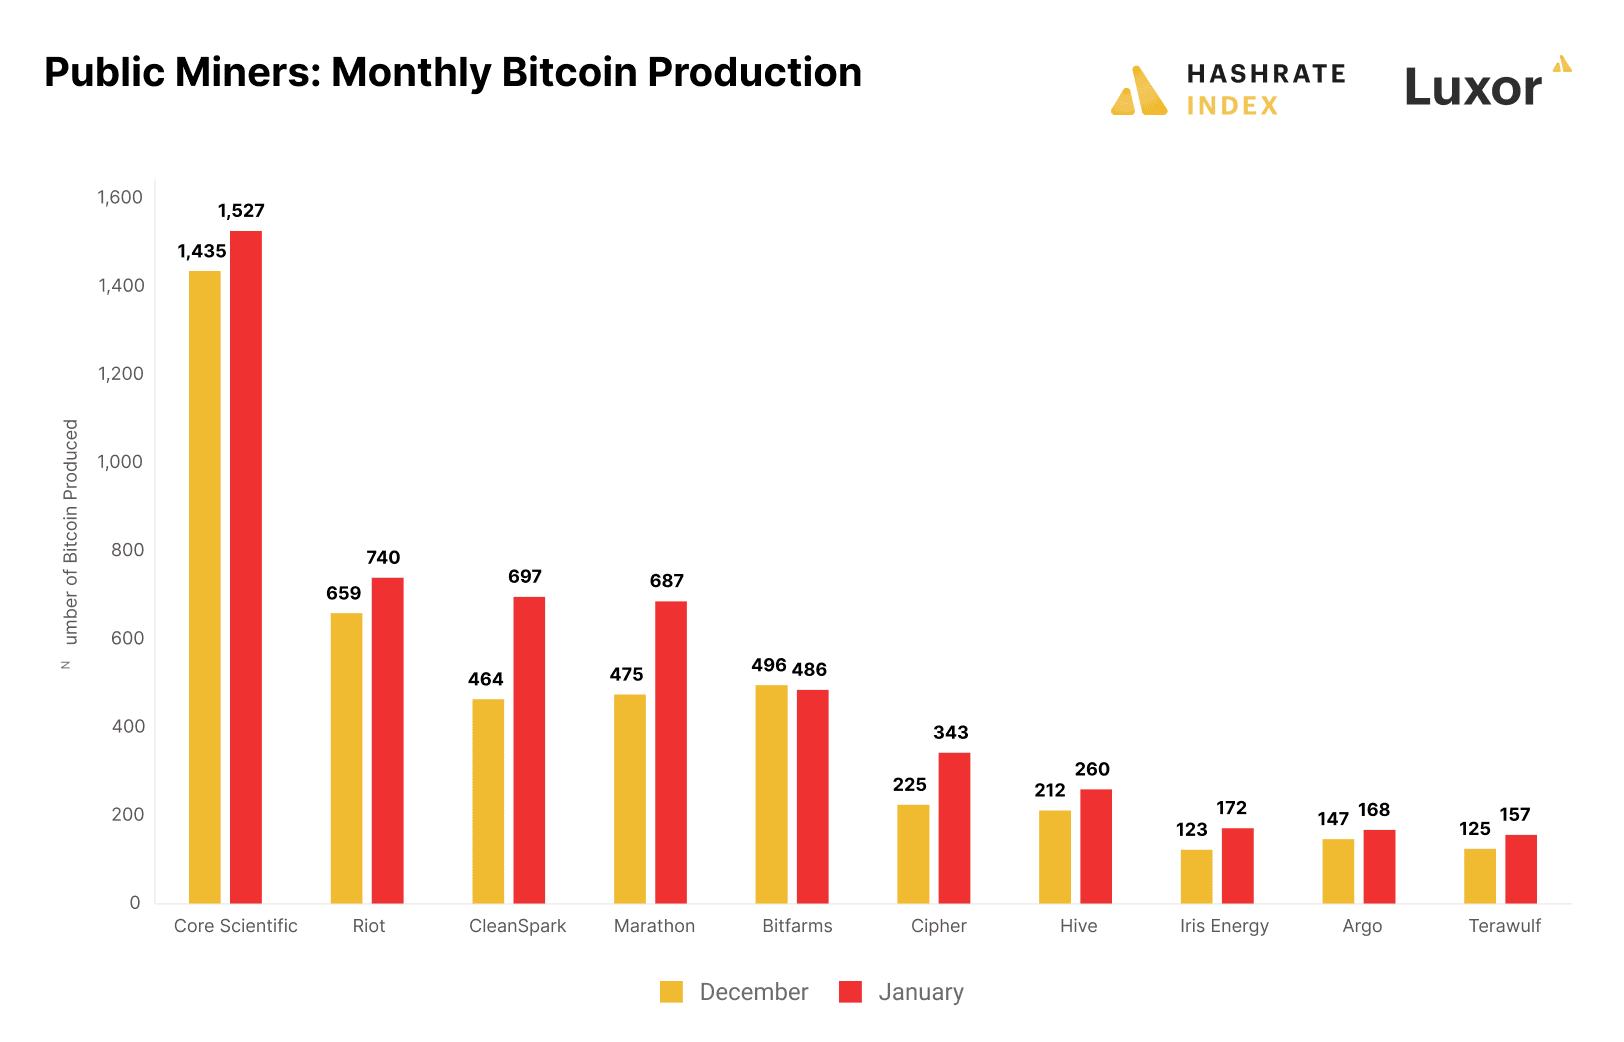 Bitcoin public miners monthly Bitcoin production